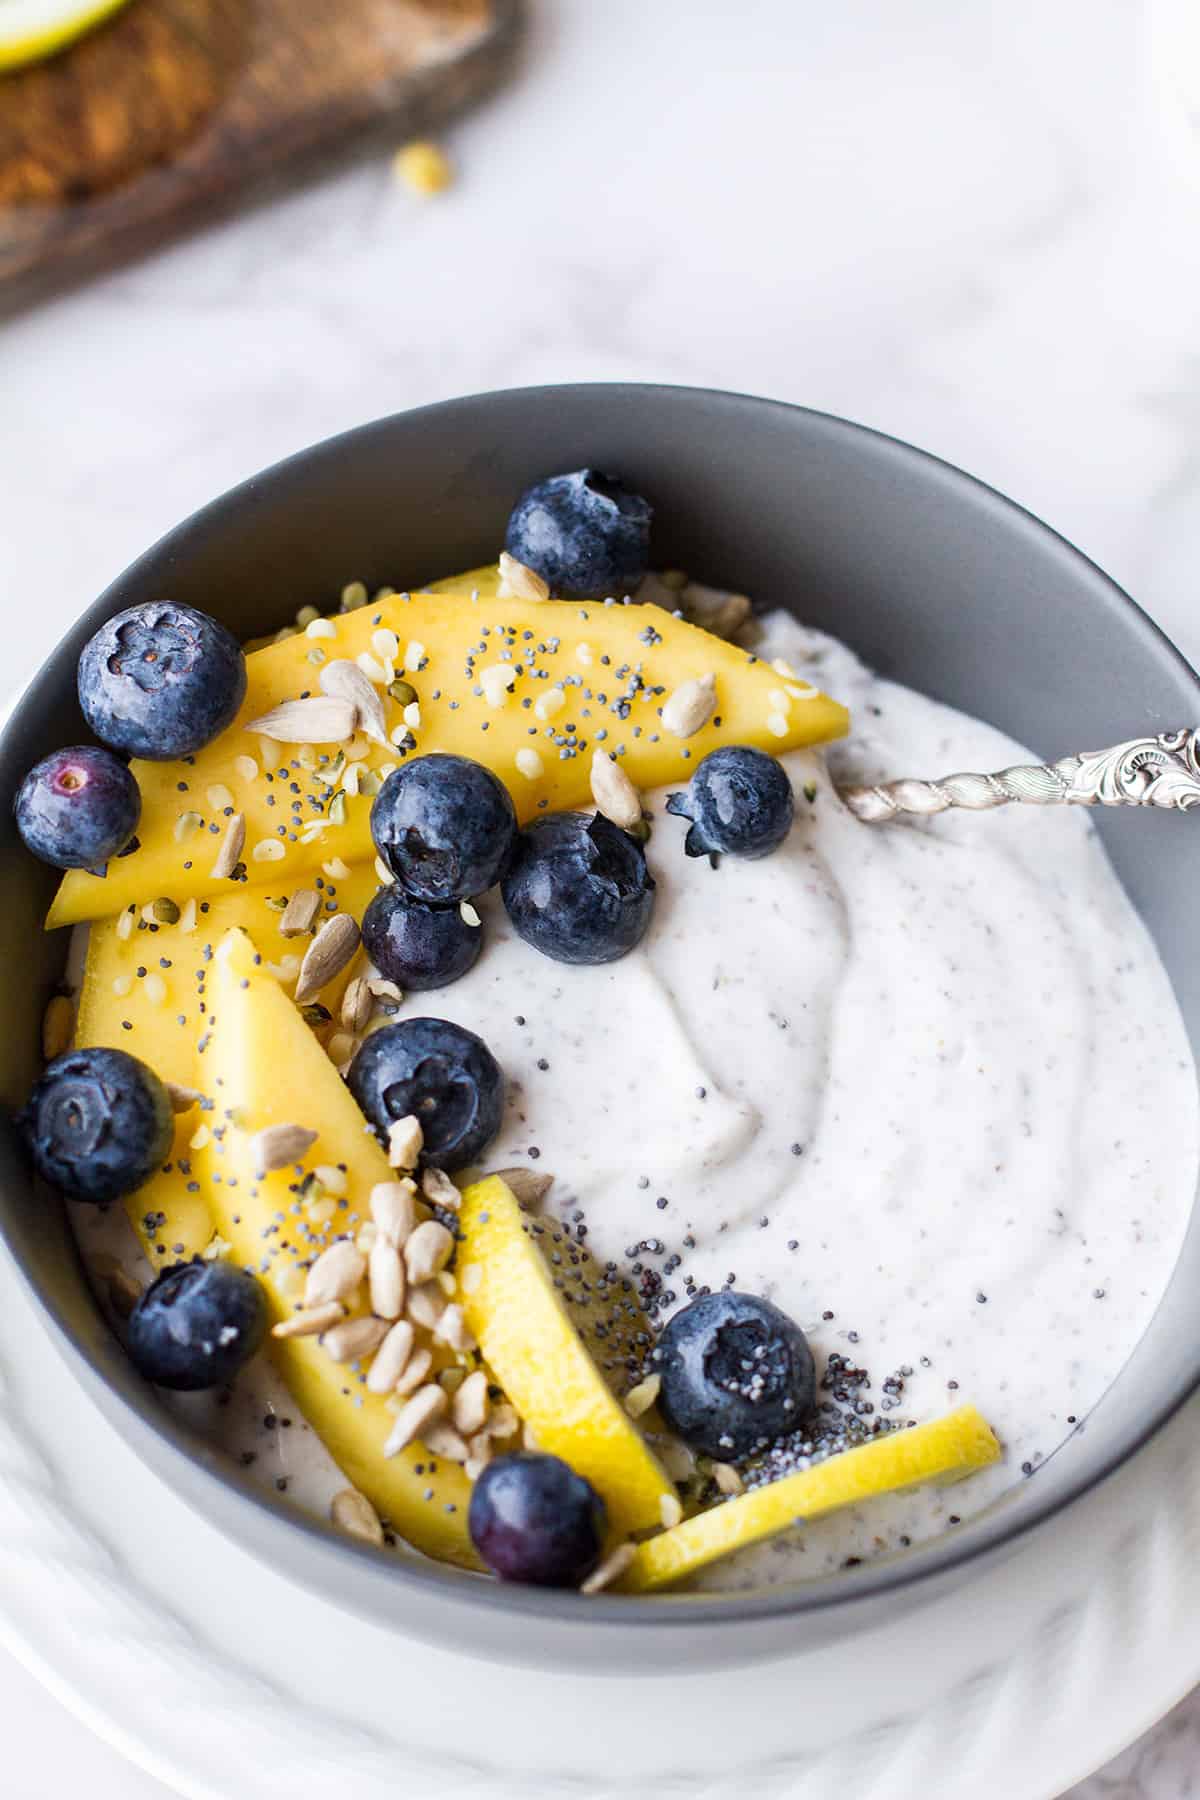 Chia pudding with mango, sunflower seeds and blueberries.